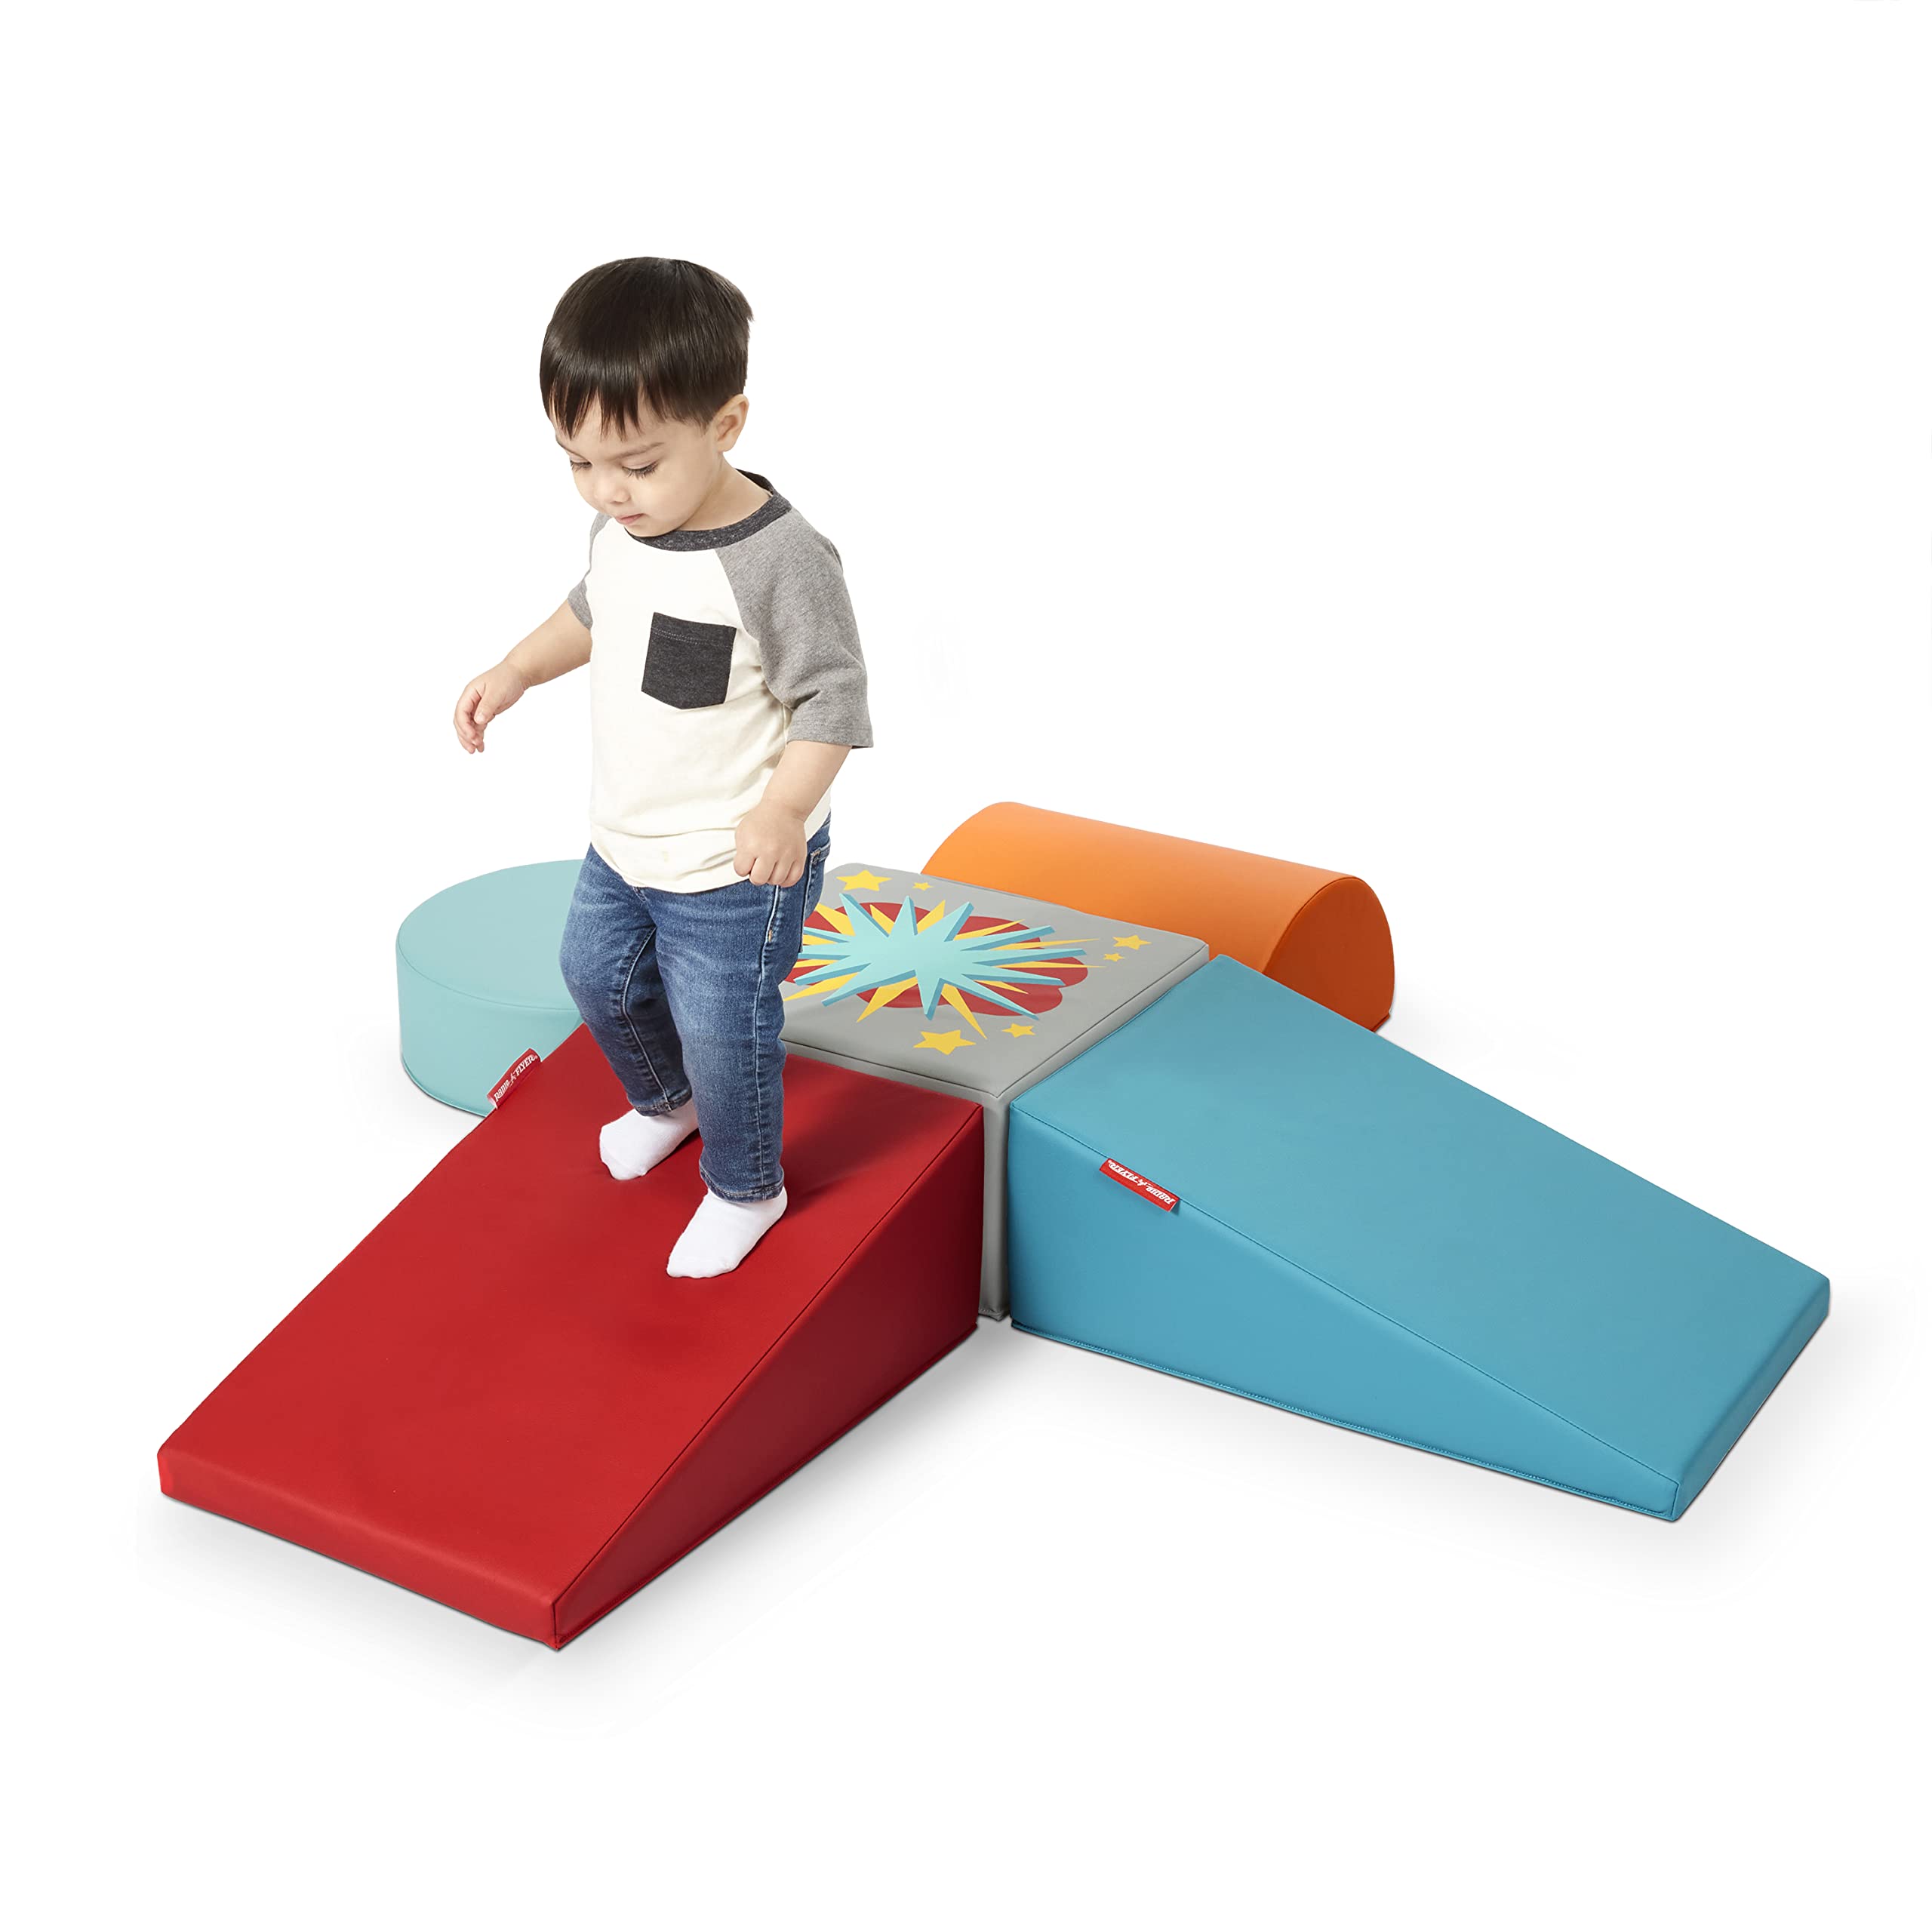 Radio Flyer Tumble Town Interactive Learning Blocks with Sounds, Kids Indoor Climber & Play Structure, Big Foam Climbing Blocks for Toddlers Ages 9 Months – 3 Years